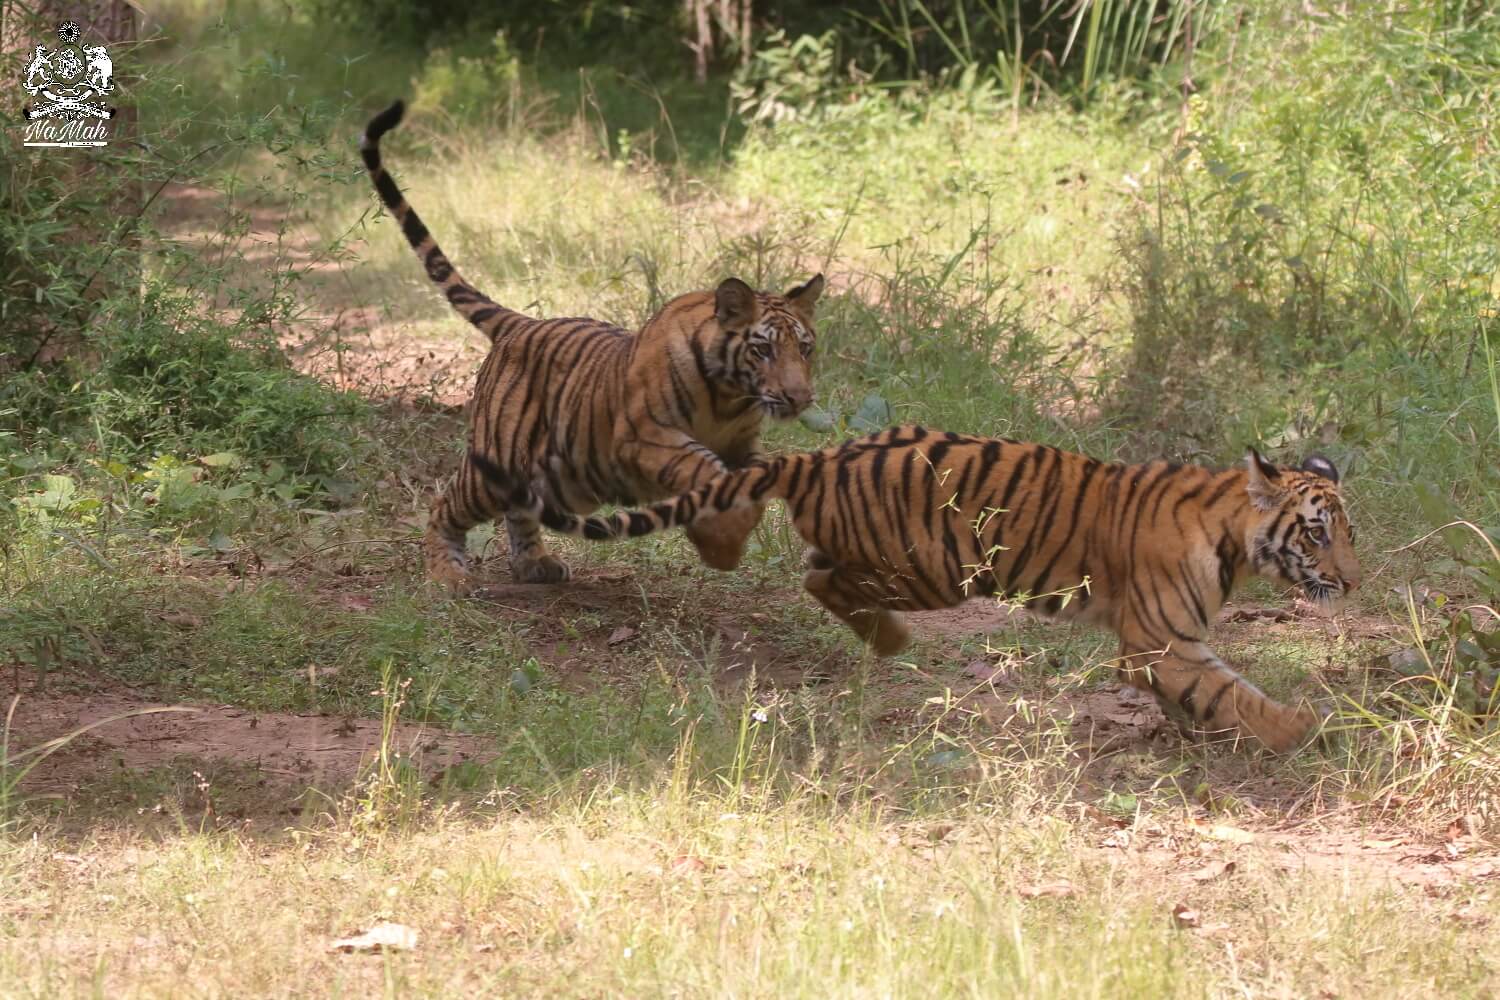 Tiger cubs playing in forest of Bandhavgarh
